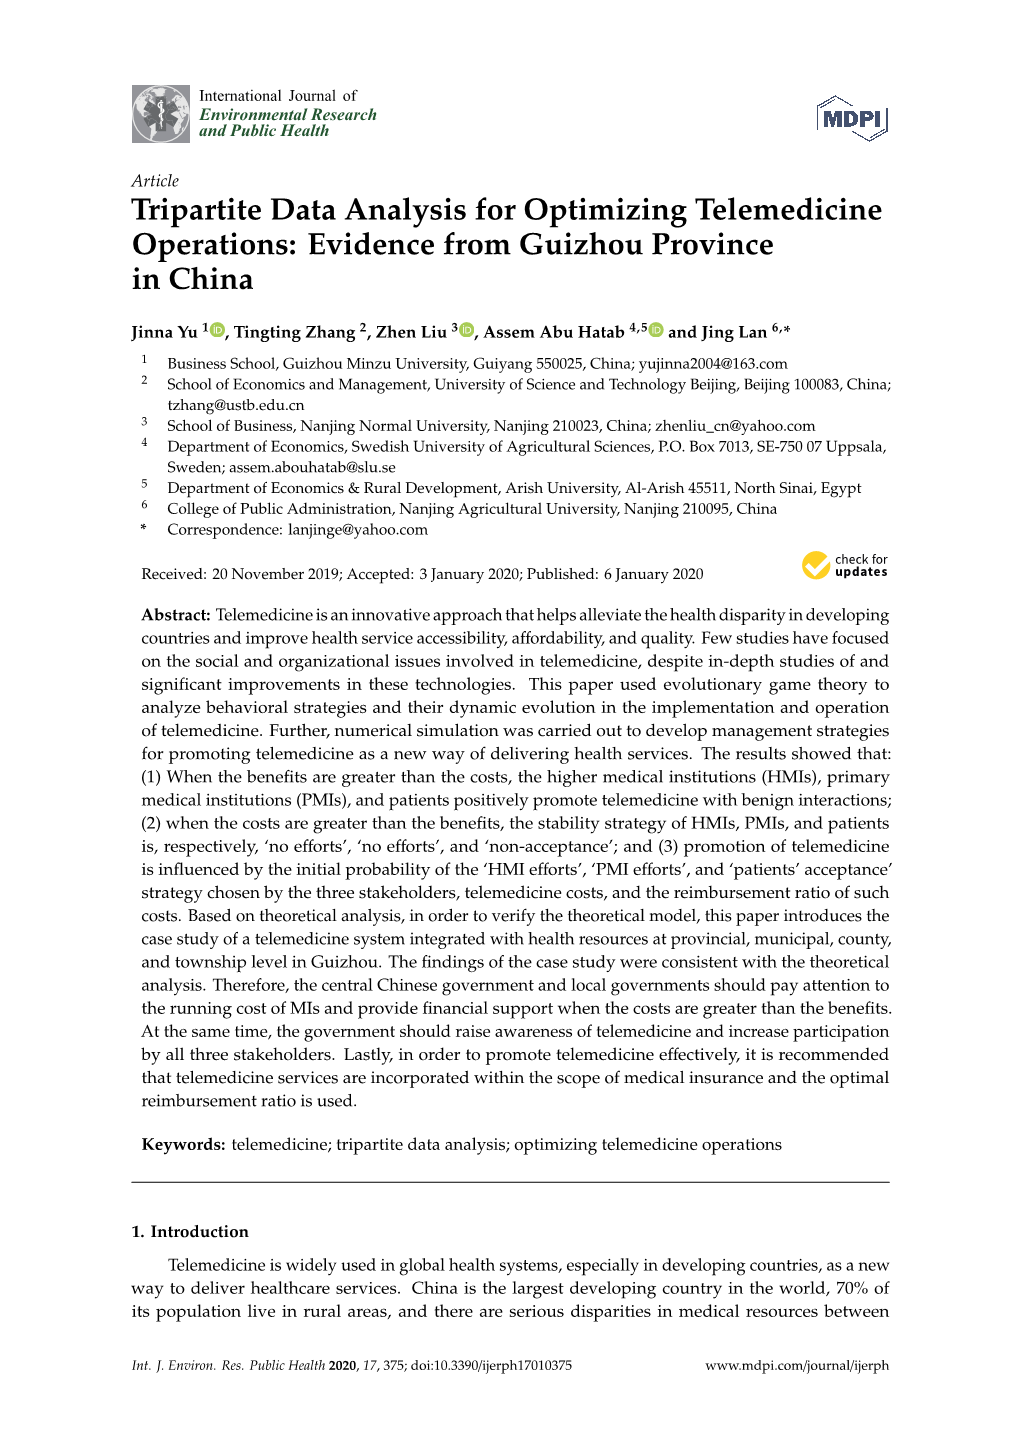 Tripartite Data Analysis for Optimizing Telemedicine Operations: Evidence from Guizhou Province in China